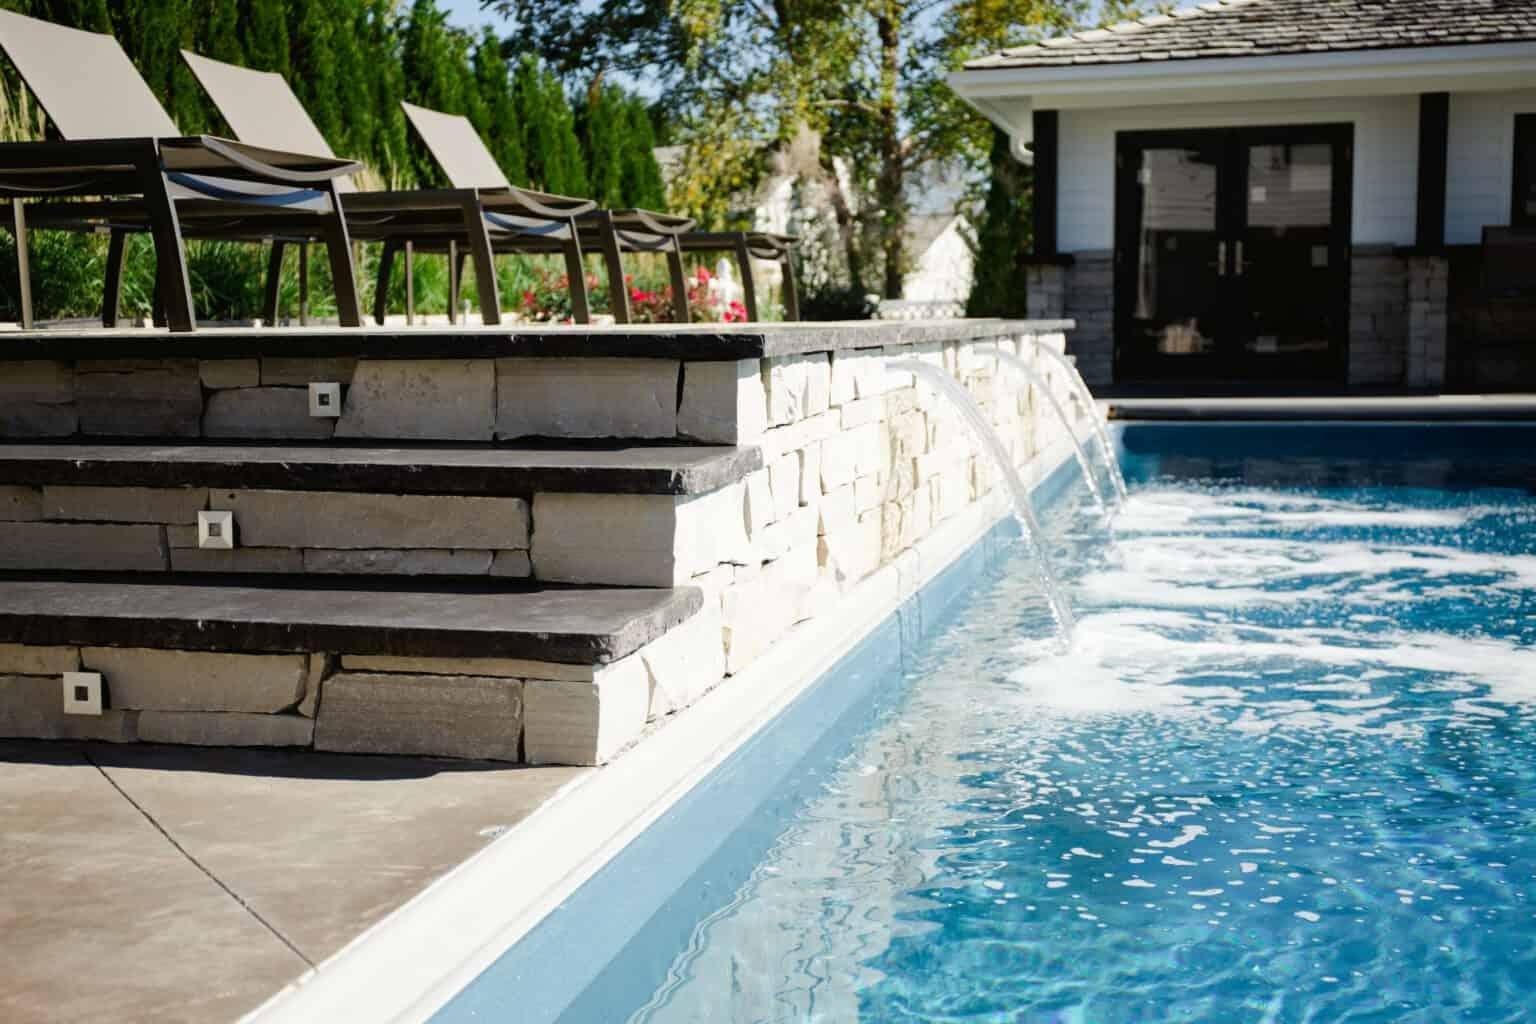 8 Ways (Plus 1!) to Know You've Found the Right Swimming Pool Builder